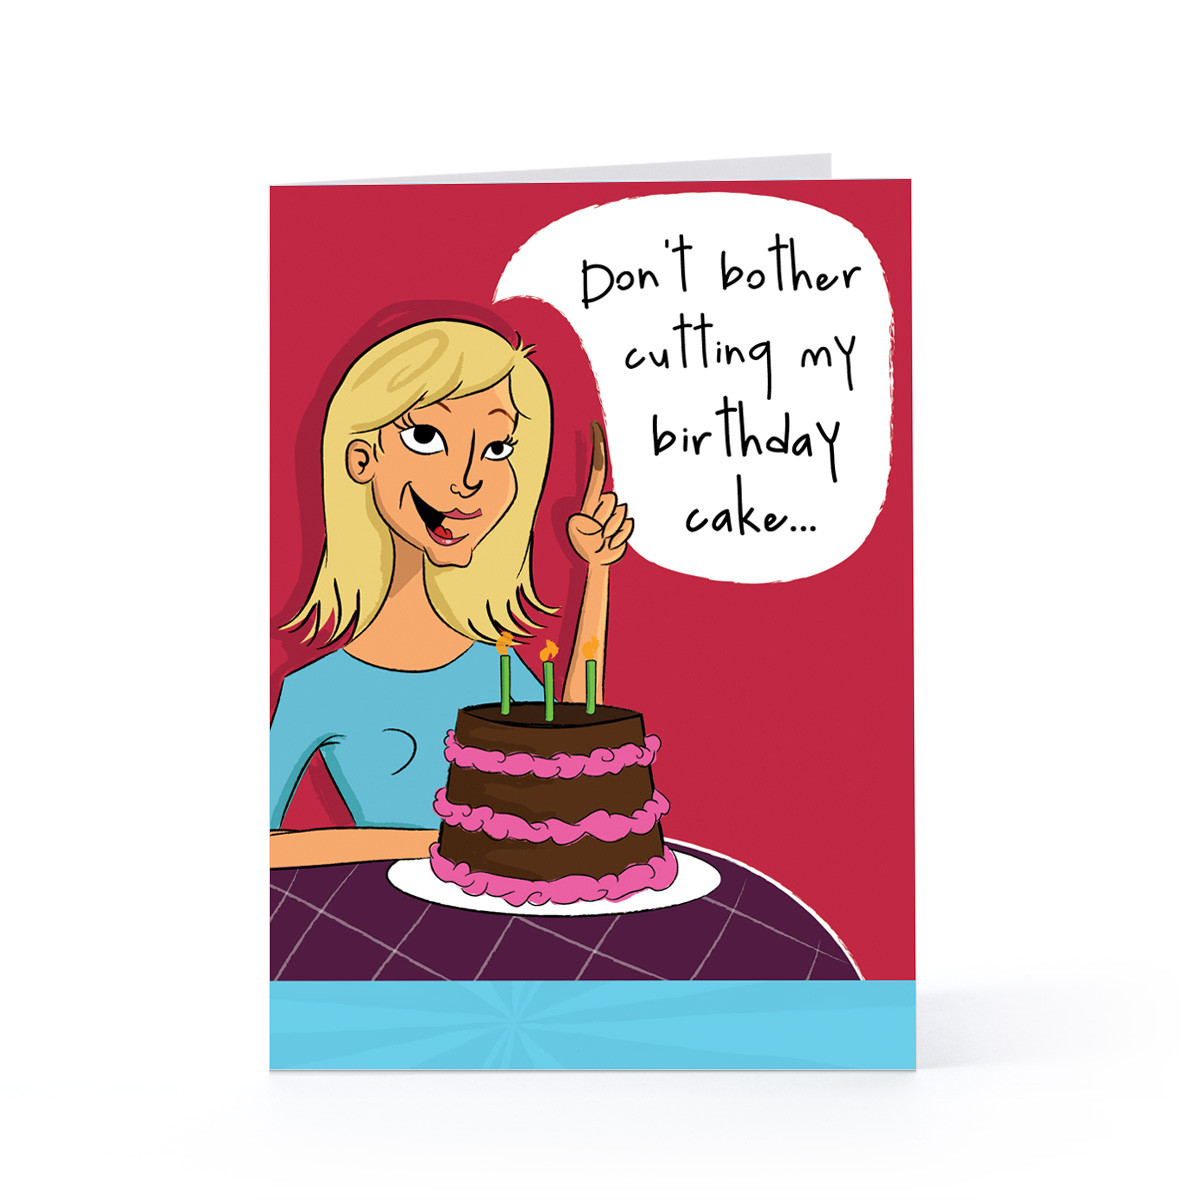 Funny Quotes For Birthday Cards
 Hallmark Card Quotes For Birthdays QuotesGram